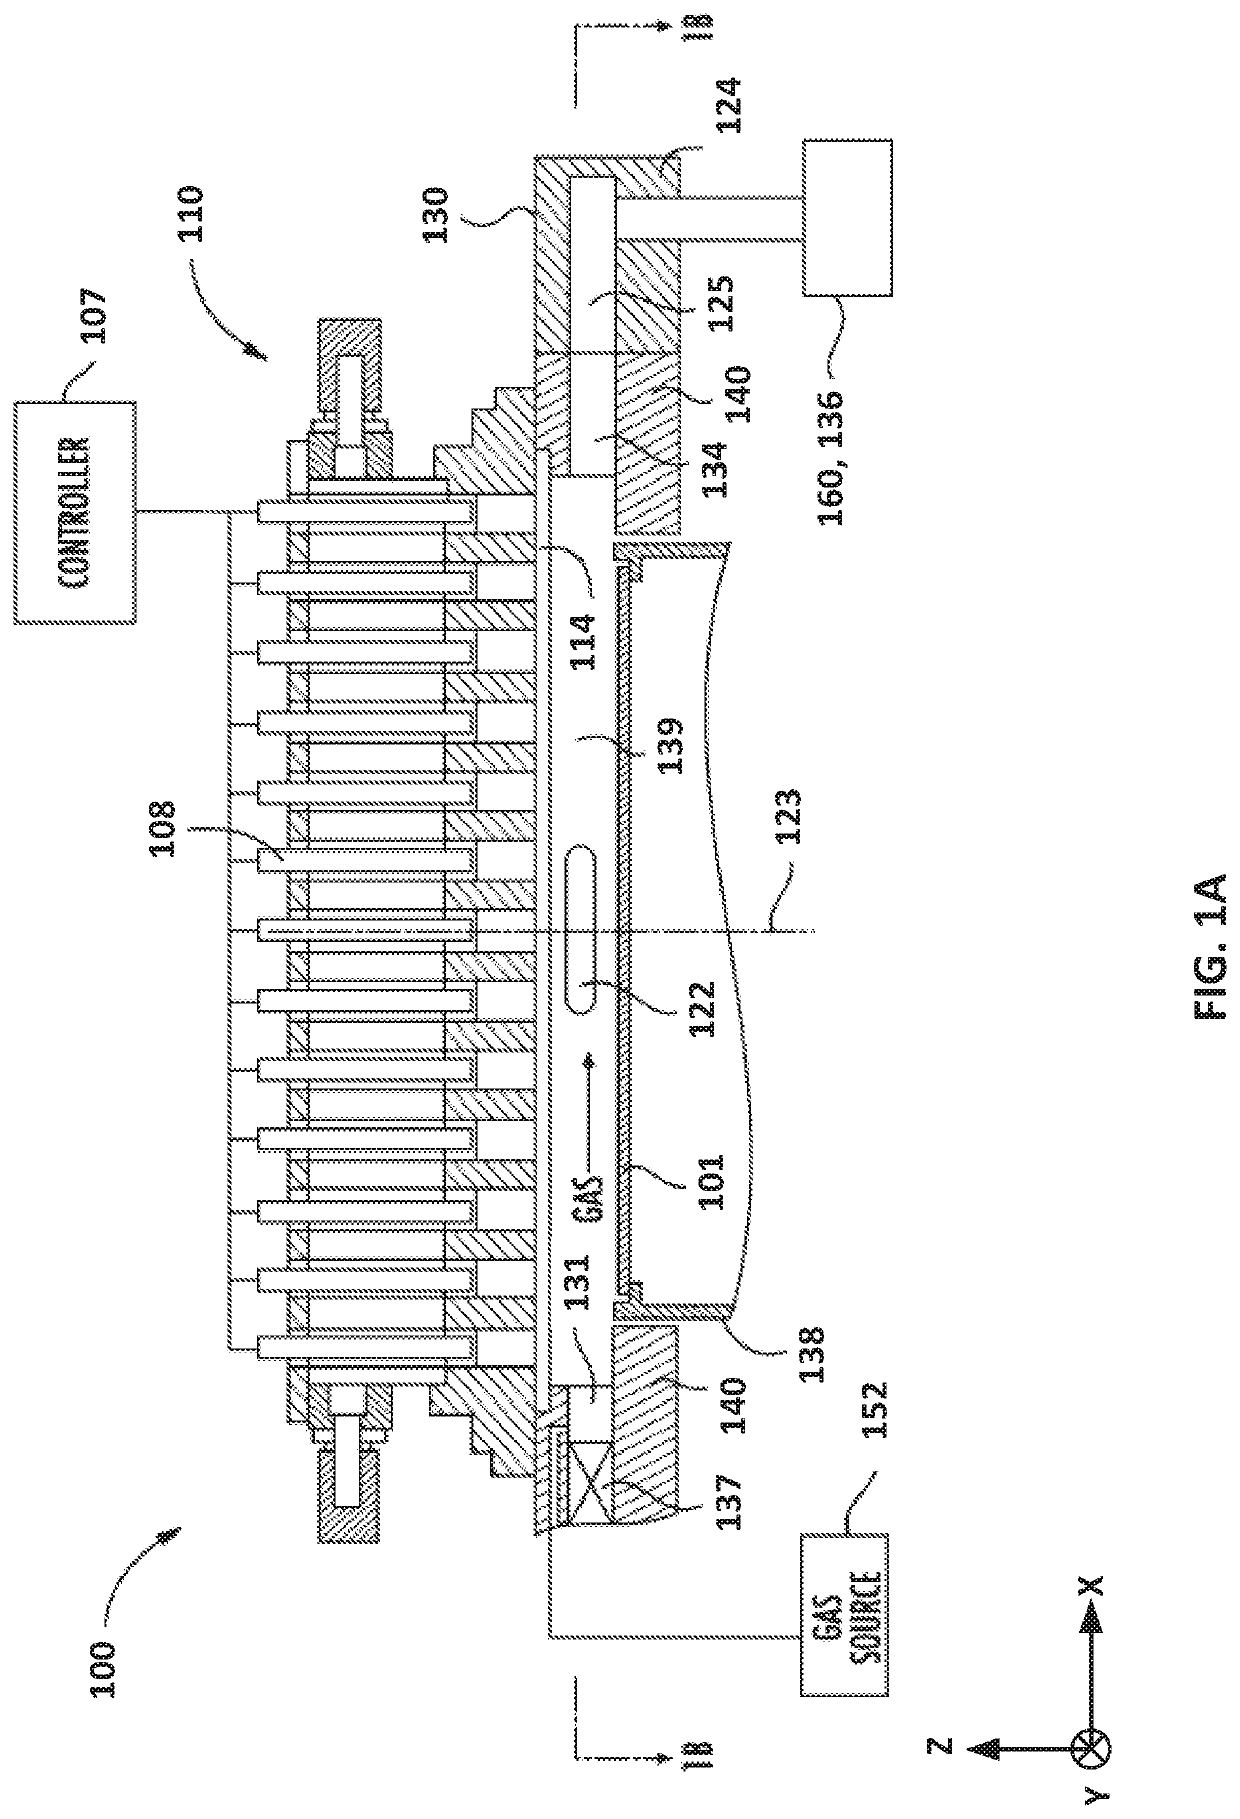 Asymmetric injection for better wafer uniformity